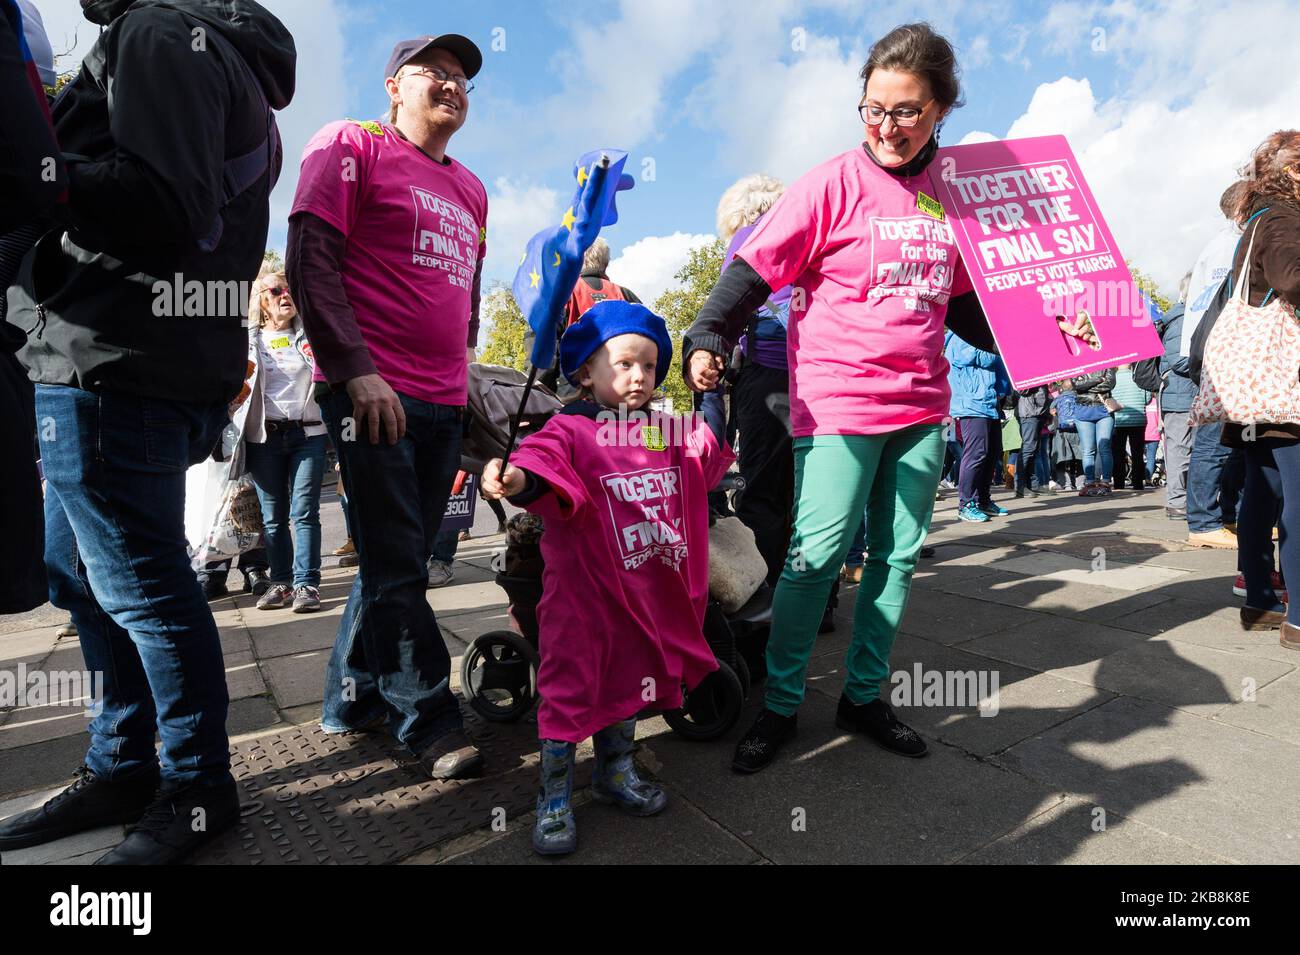 A child walks with her parents as they gather ahead of 'Together for the Final Say' march through central London to demand a public vote on the outcome of Brexit on 19 October, 2019 in London, England. The demonstration coincides with an emergency Saturday session of Parliament where MPs will debate and vote on Prime Minister's EU withdrawal deal including selected amendments. (Photo by WIktor Szymanowicz/NurPhoto) Stock Photo